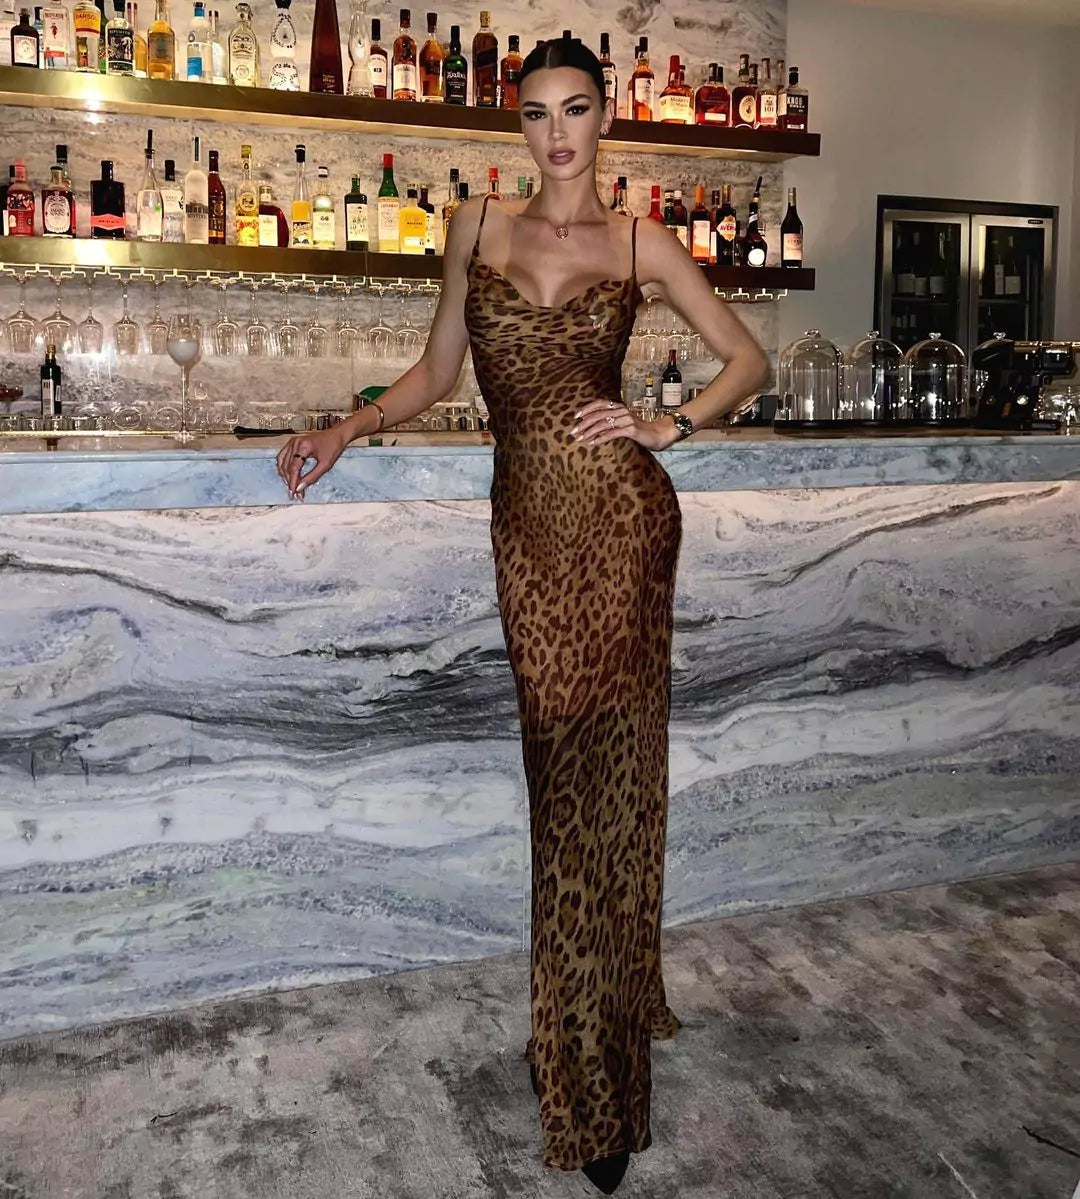 A woman making a style statement in a leopard print dress posing in front of a bar.